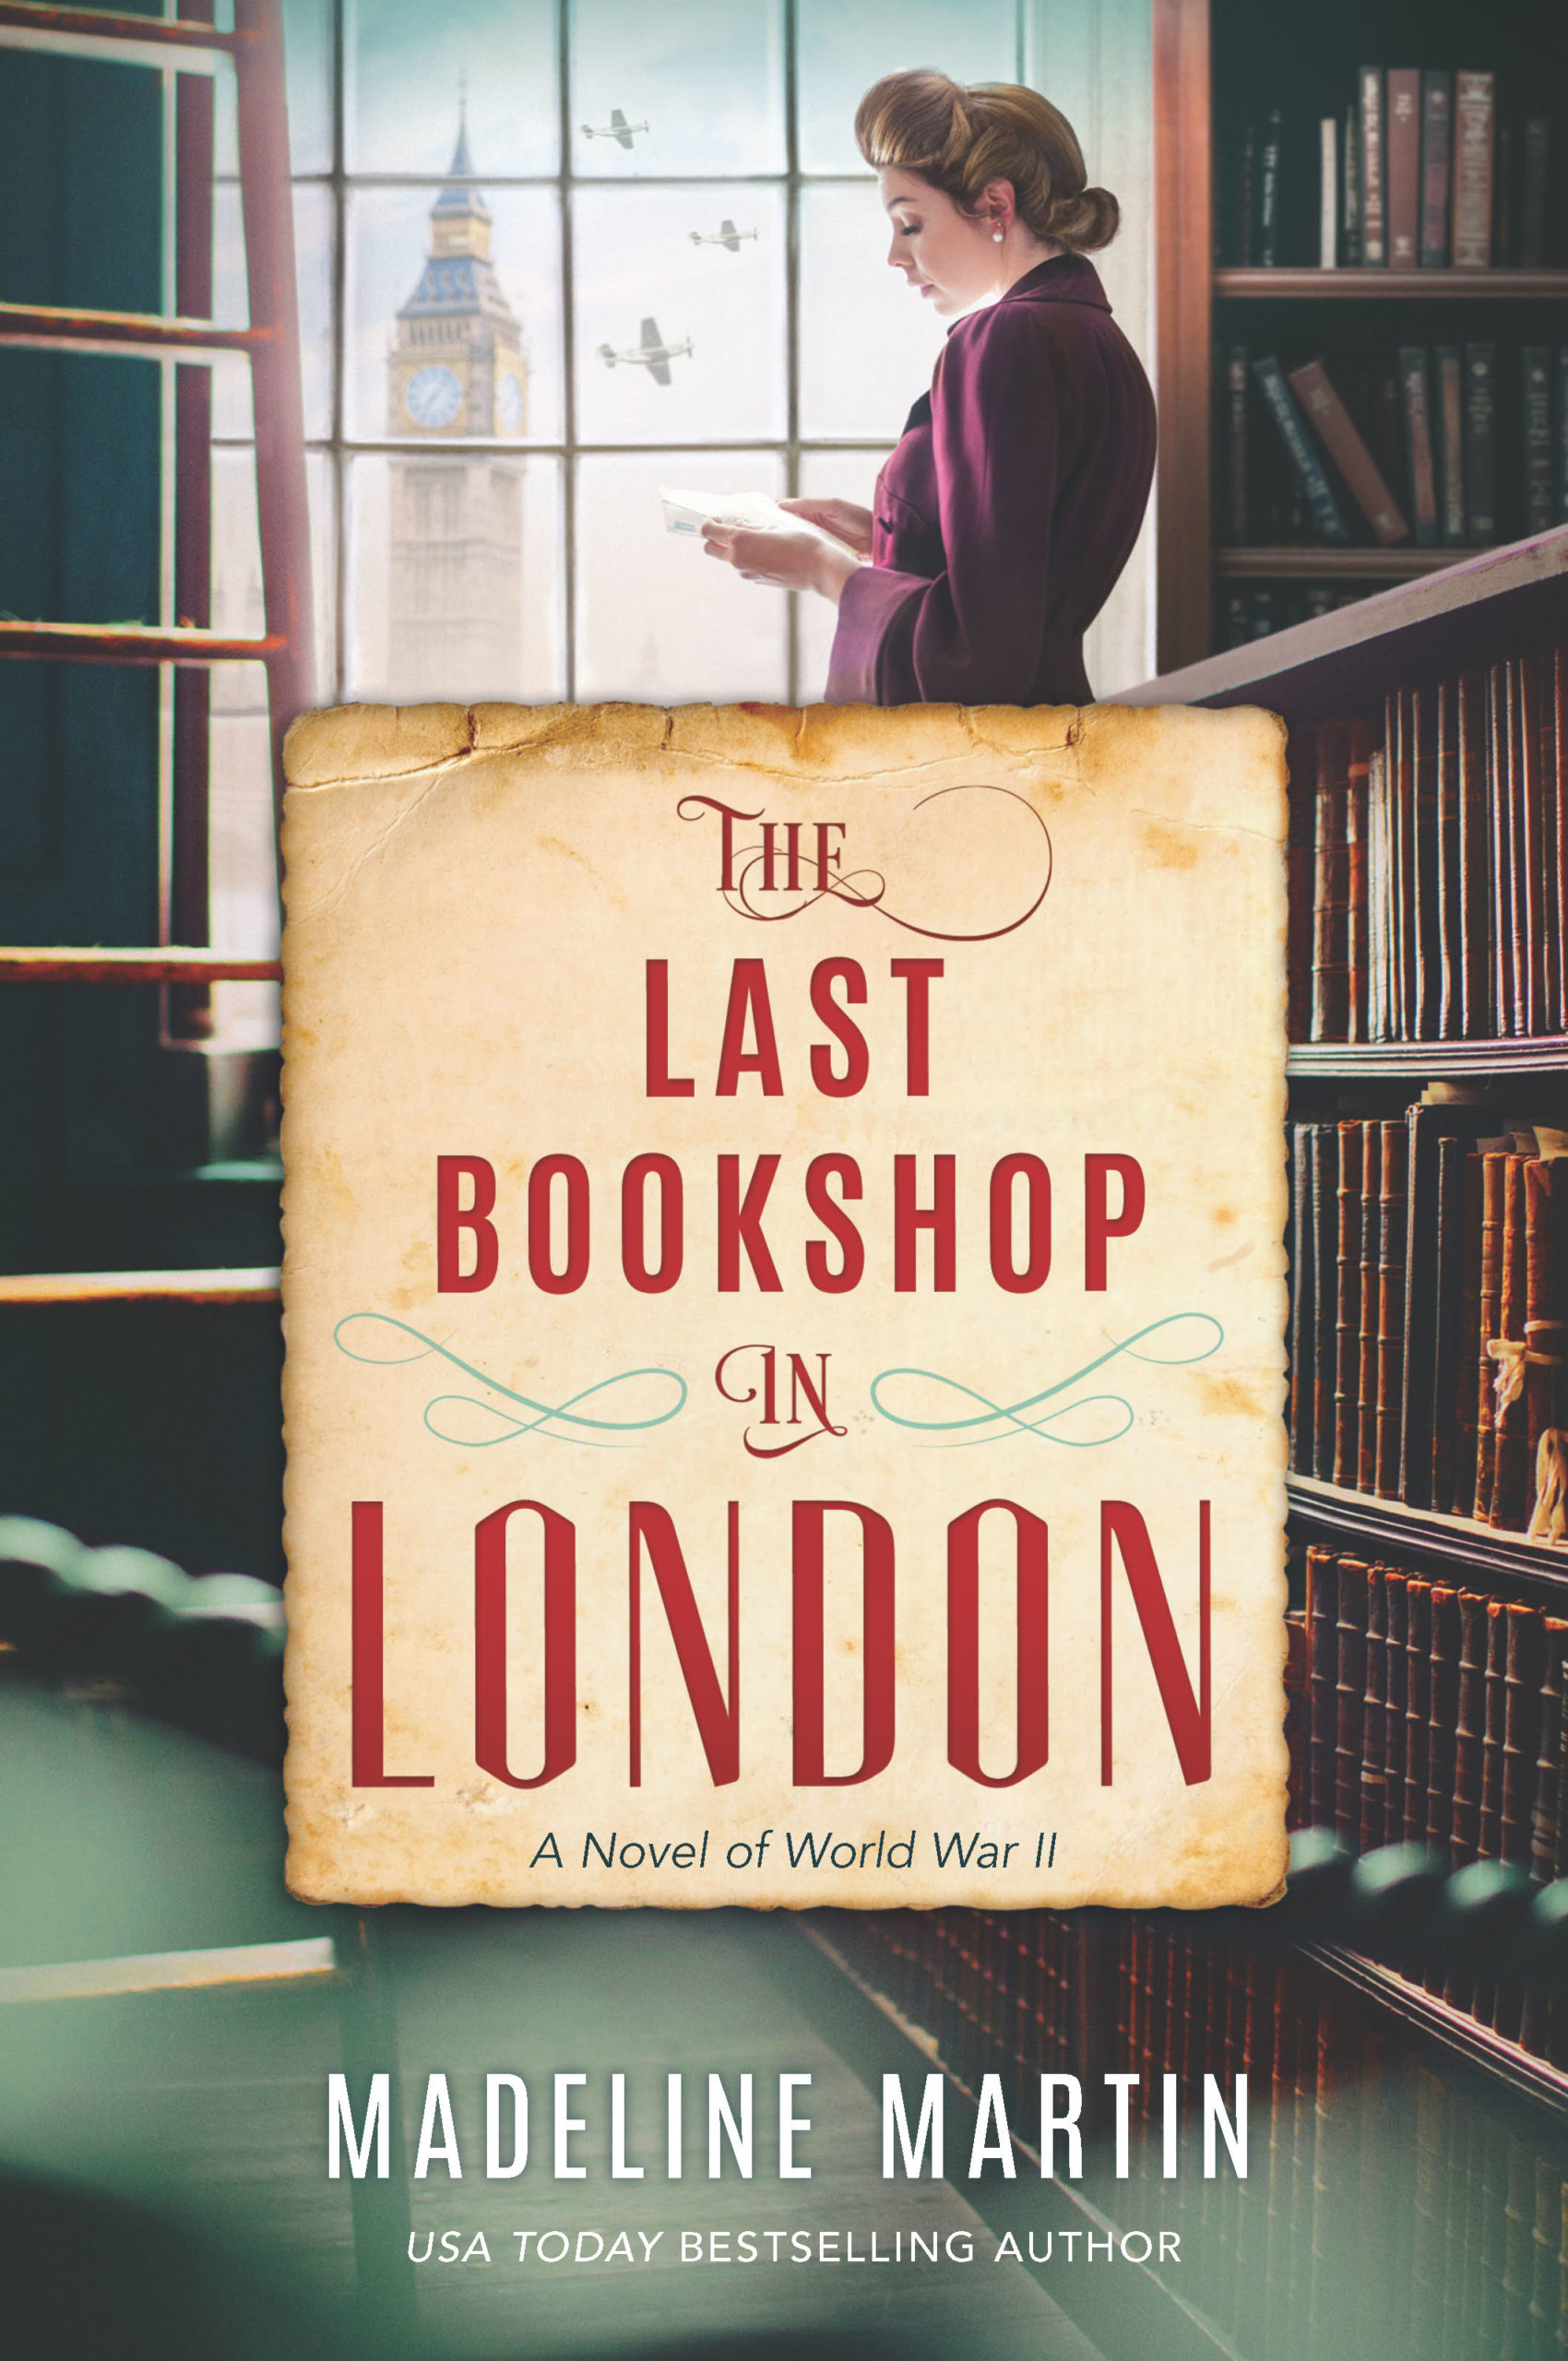 Dedicated: The Last Bookshop in London (Review by Erin Woodward)